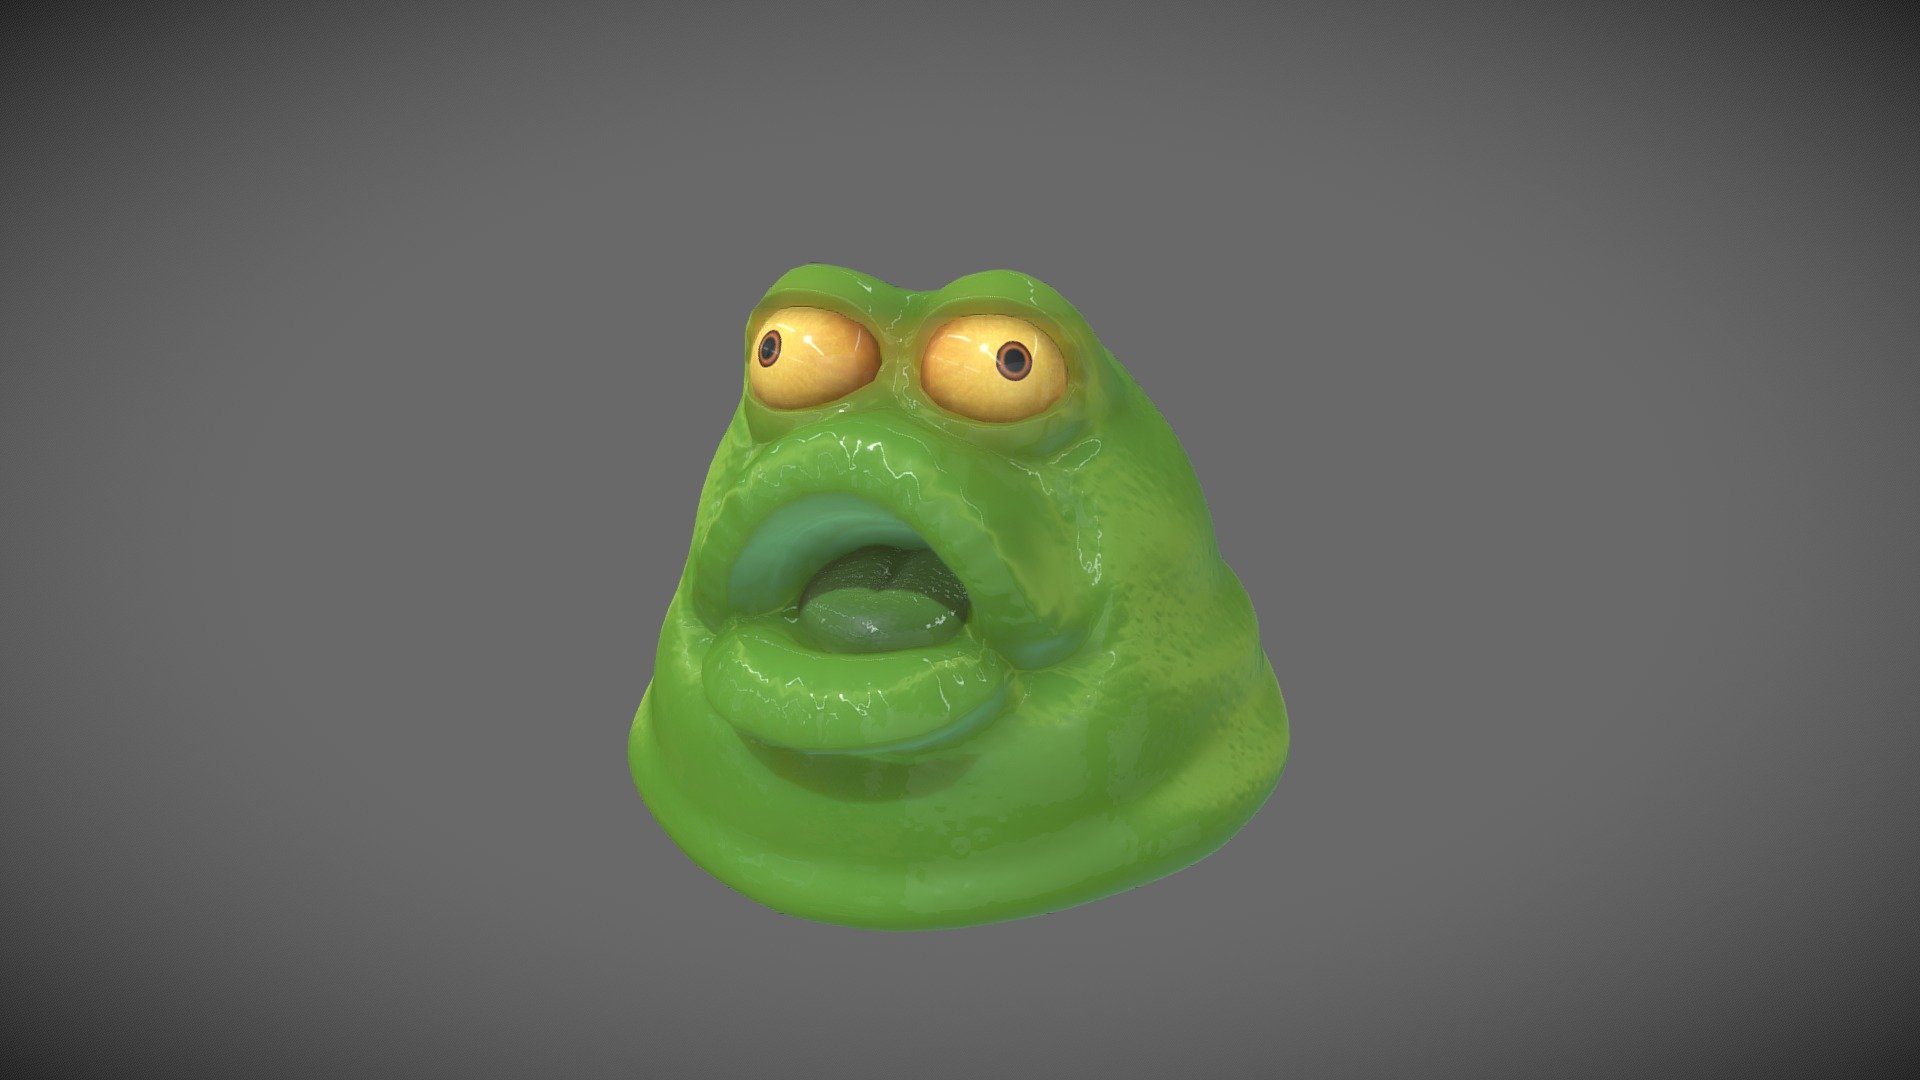 Squish and squash

Animated version:
https://skfb.ly/oODNQ - Blob Enemy - 3D model by Dina (@behere) 3d model